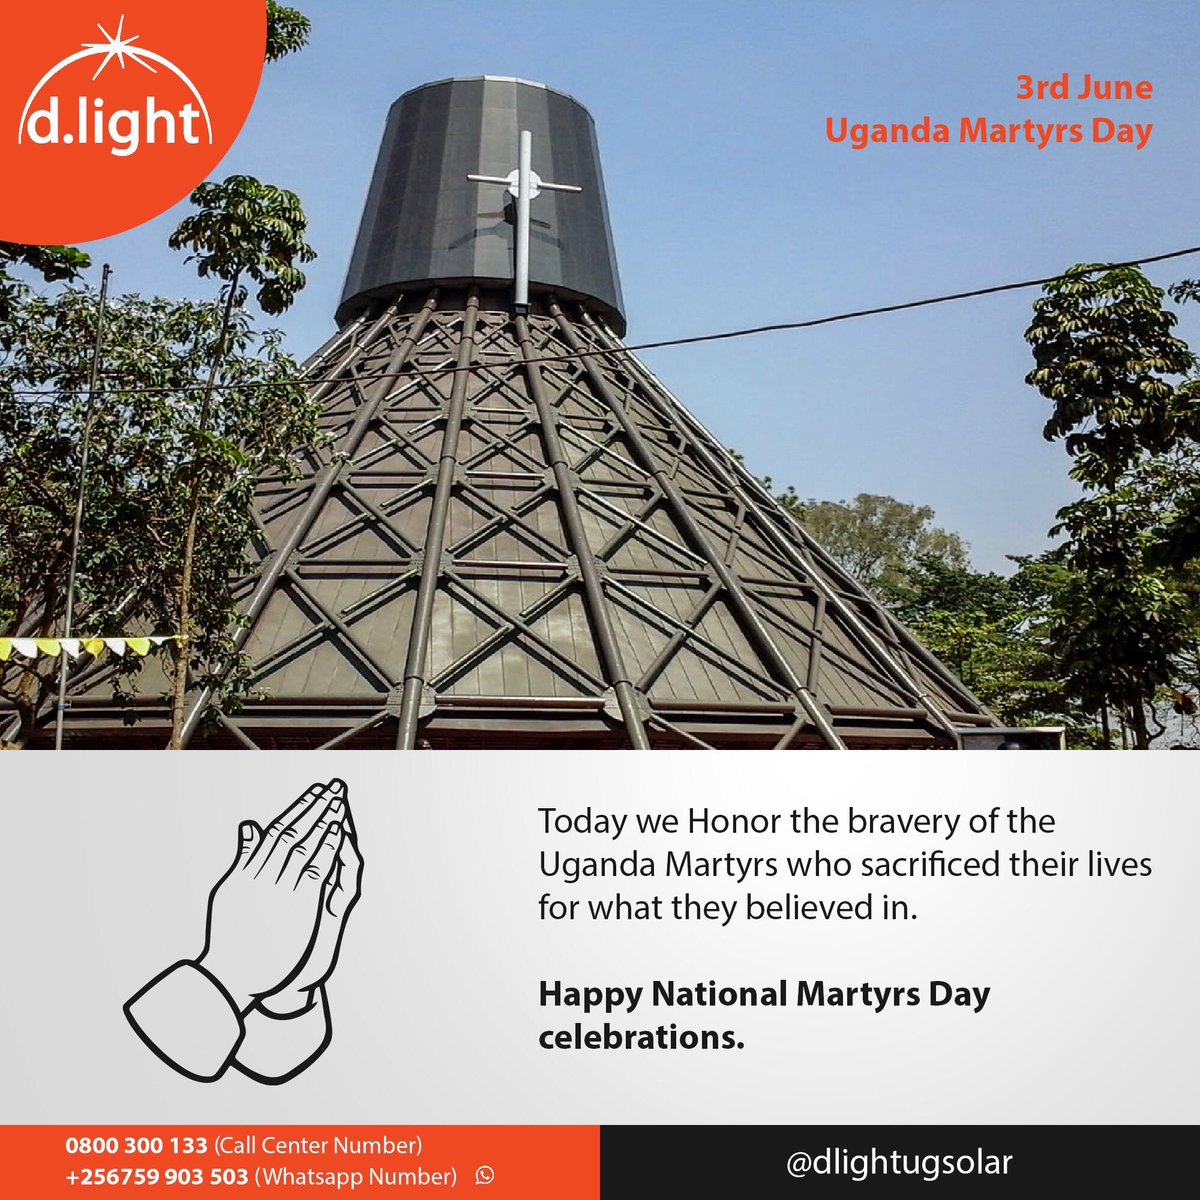 Today We remember the Brave Sacrifice of the Martyrs and how it changed our lives forever.

Happy Uganda Martyrs day Celebrations